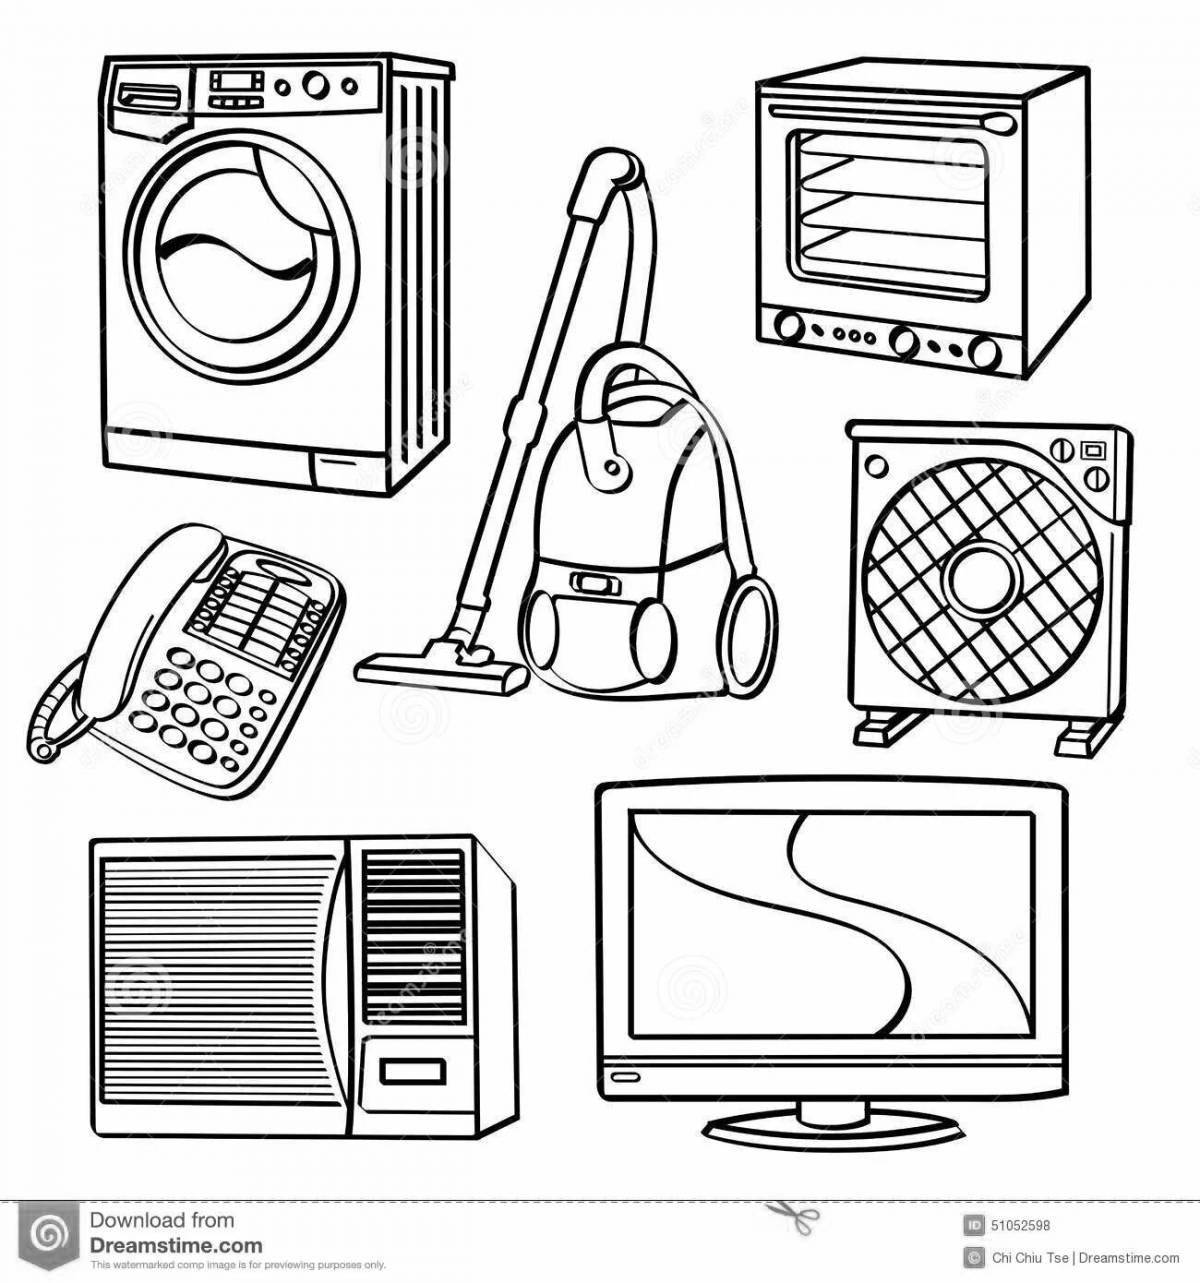 Electrical appliances in senior group #11